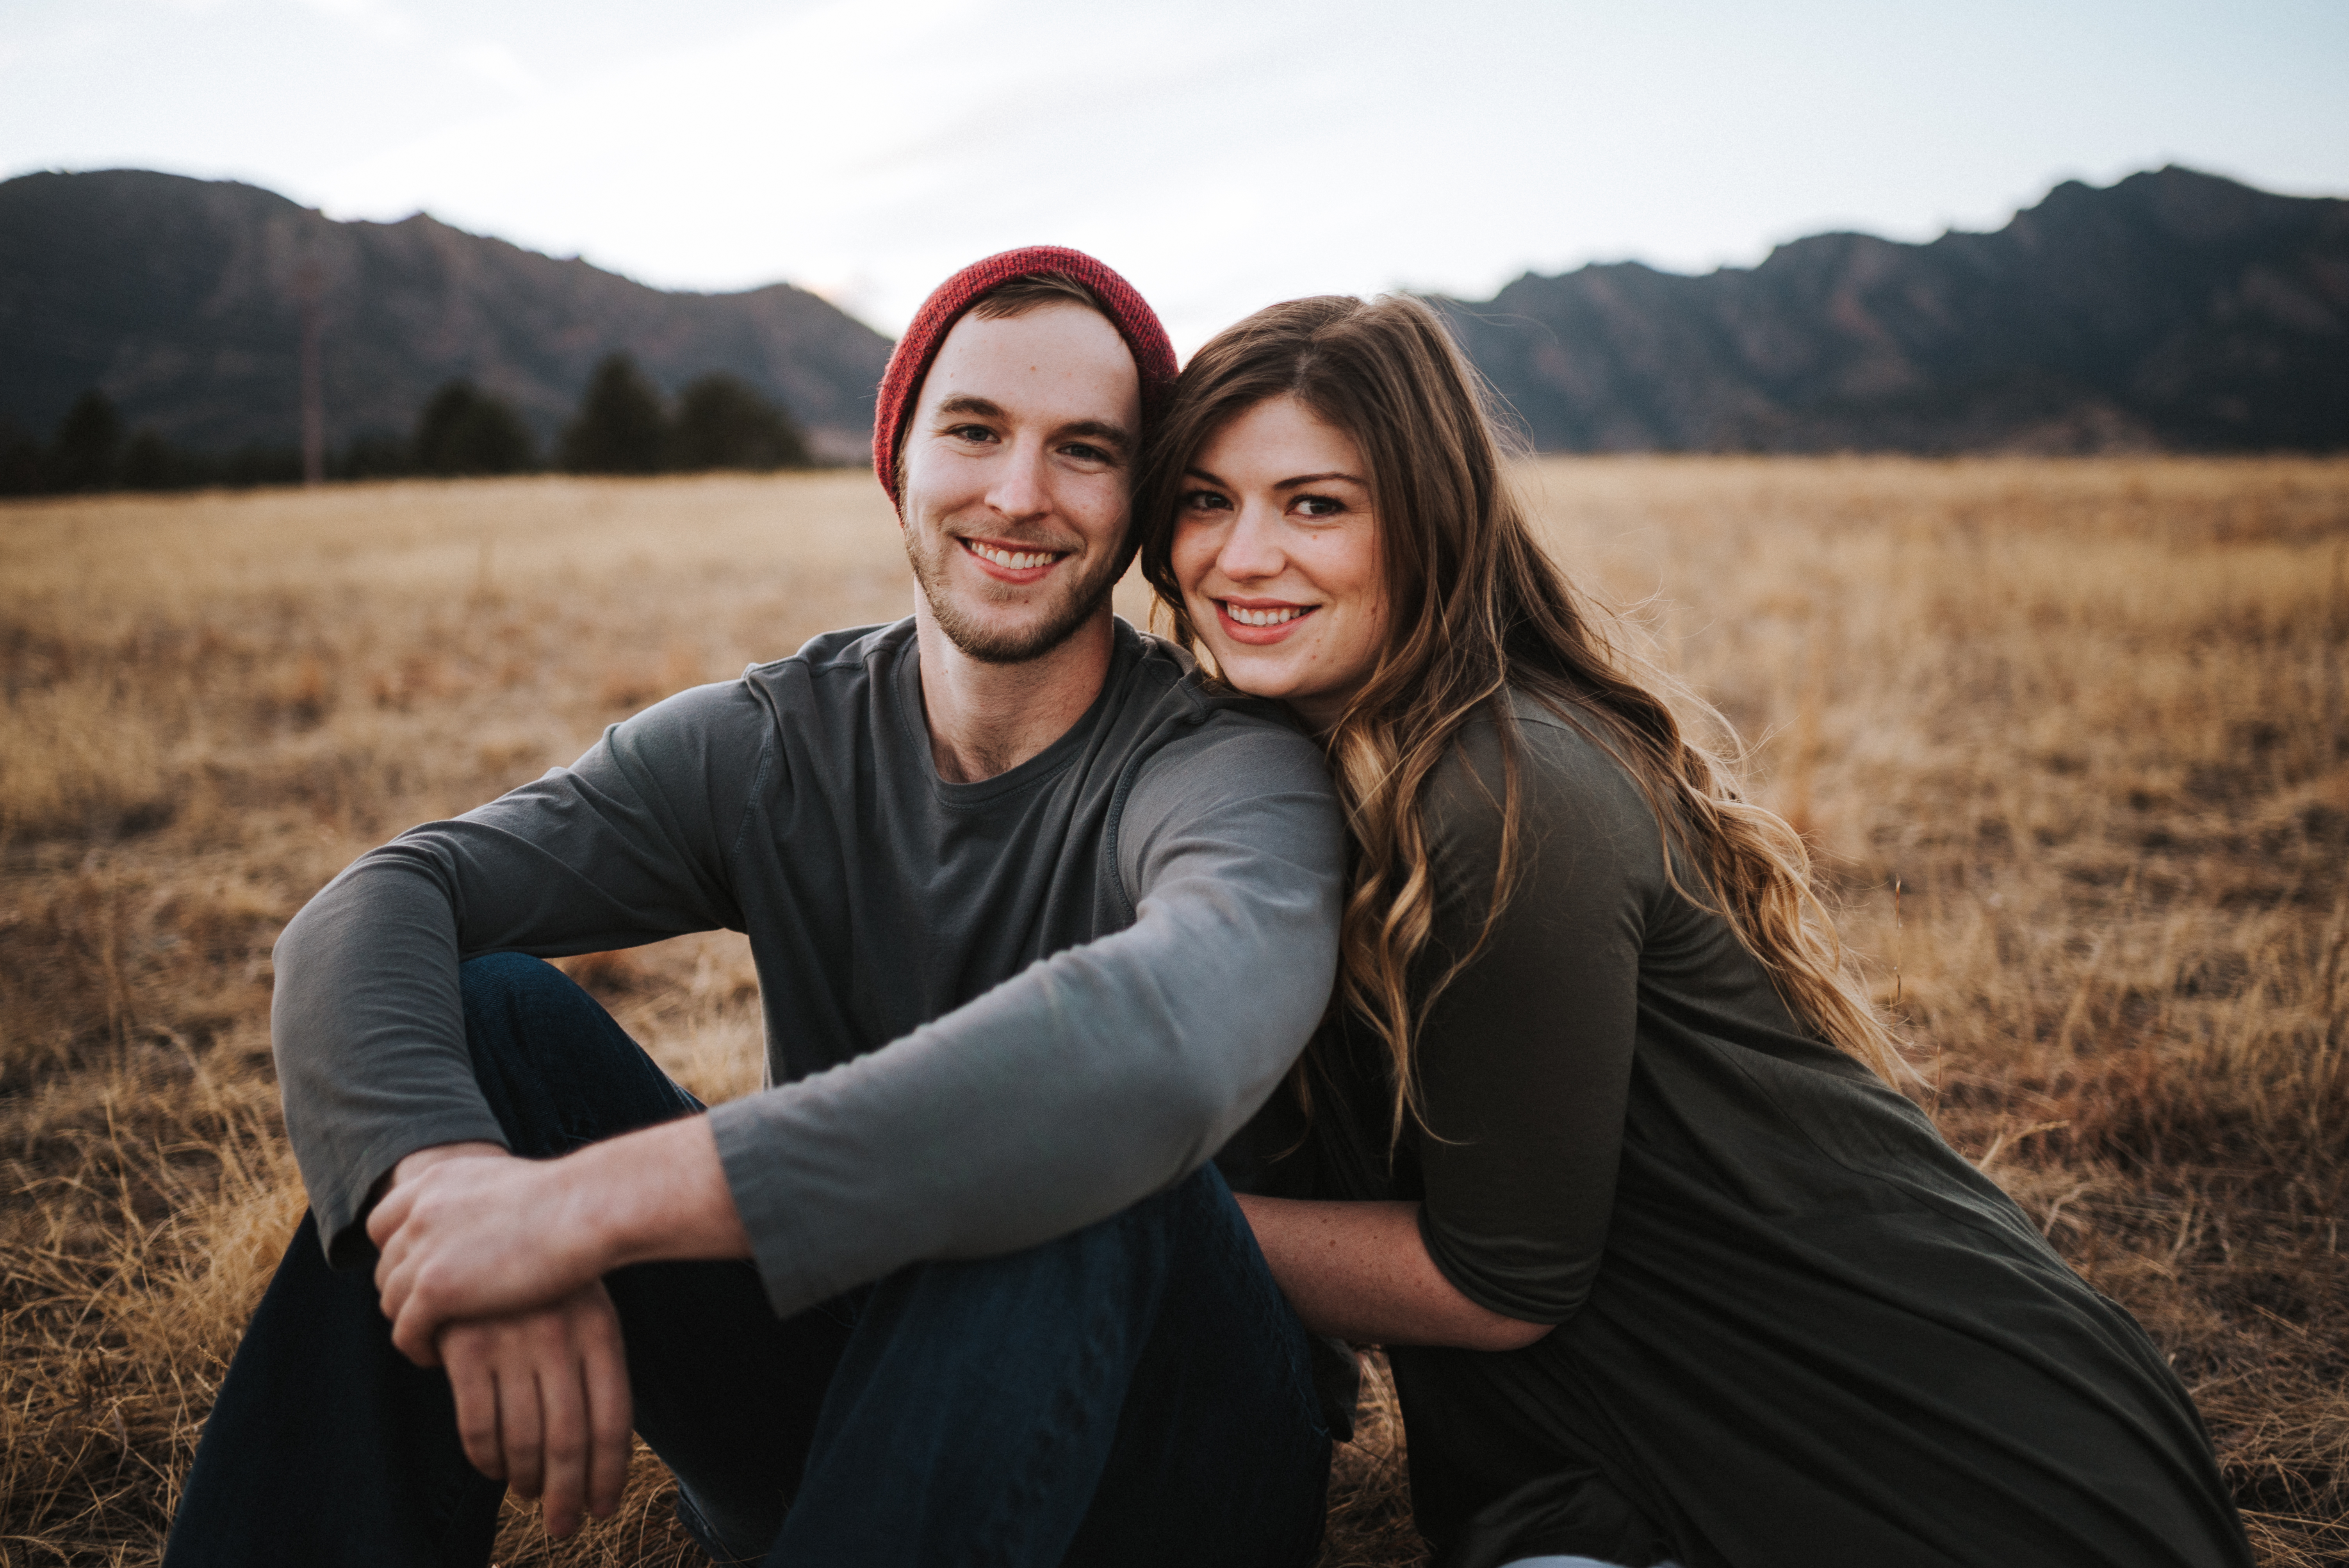 Dylan & Marc Couple Portraits | Betti Plach